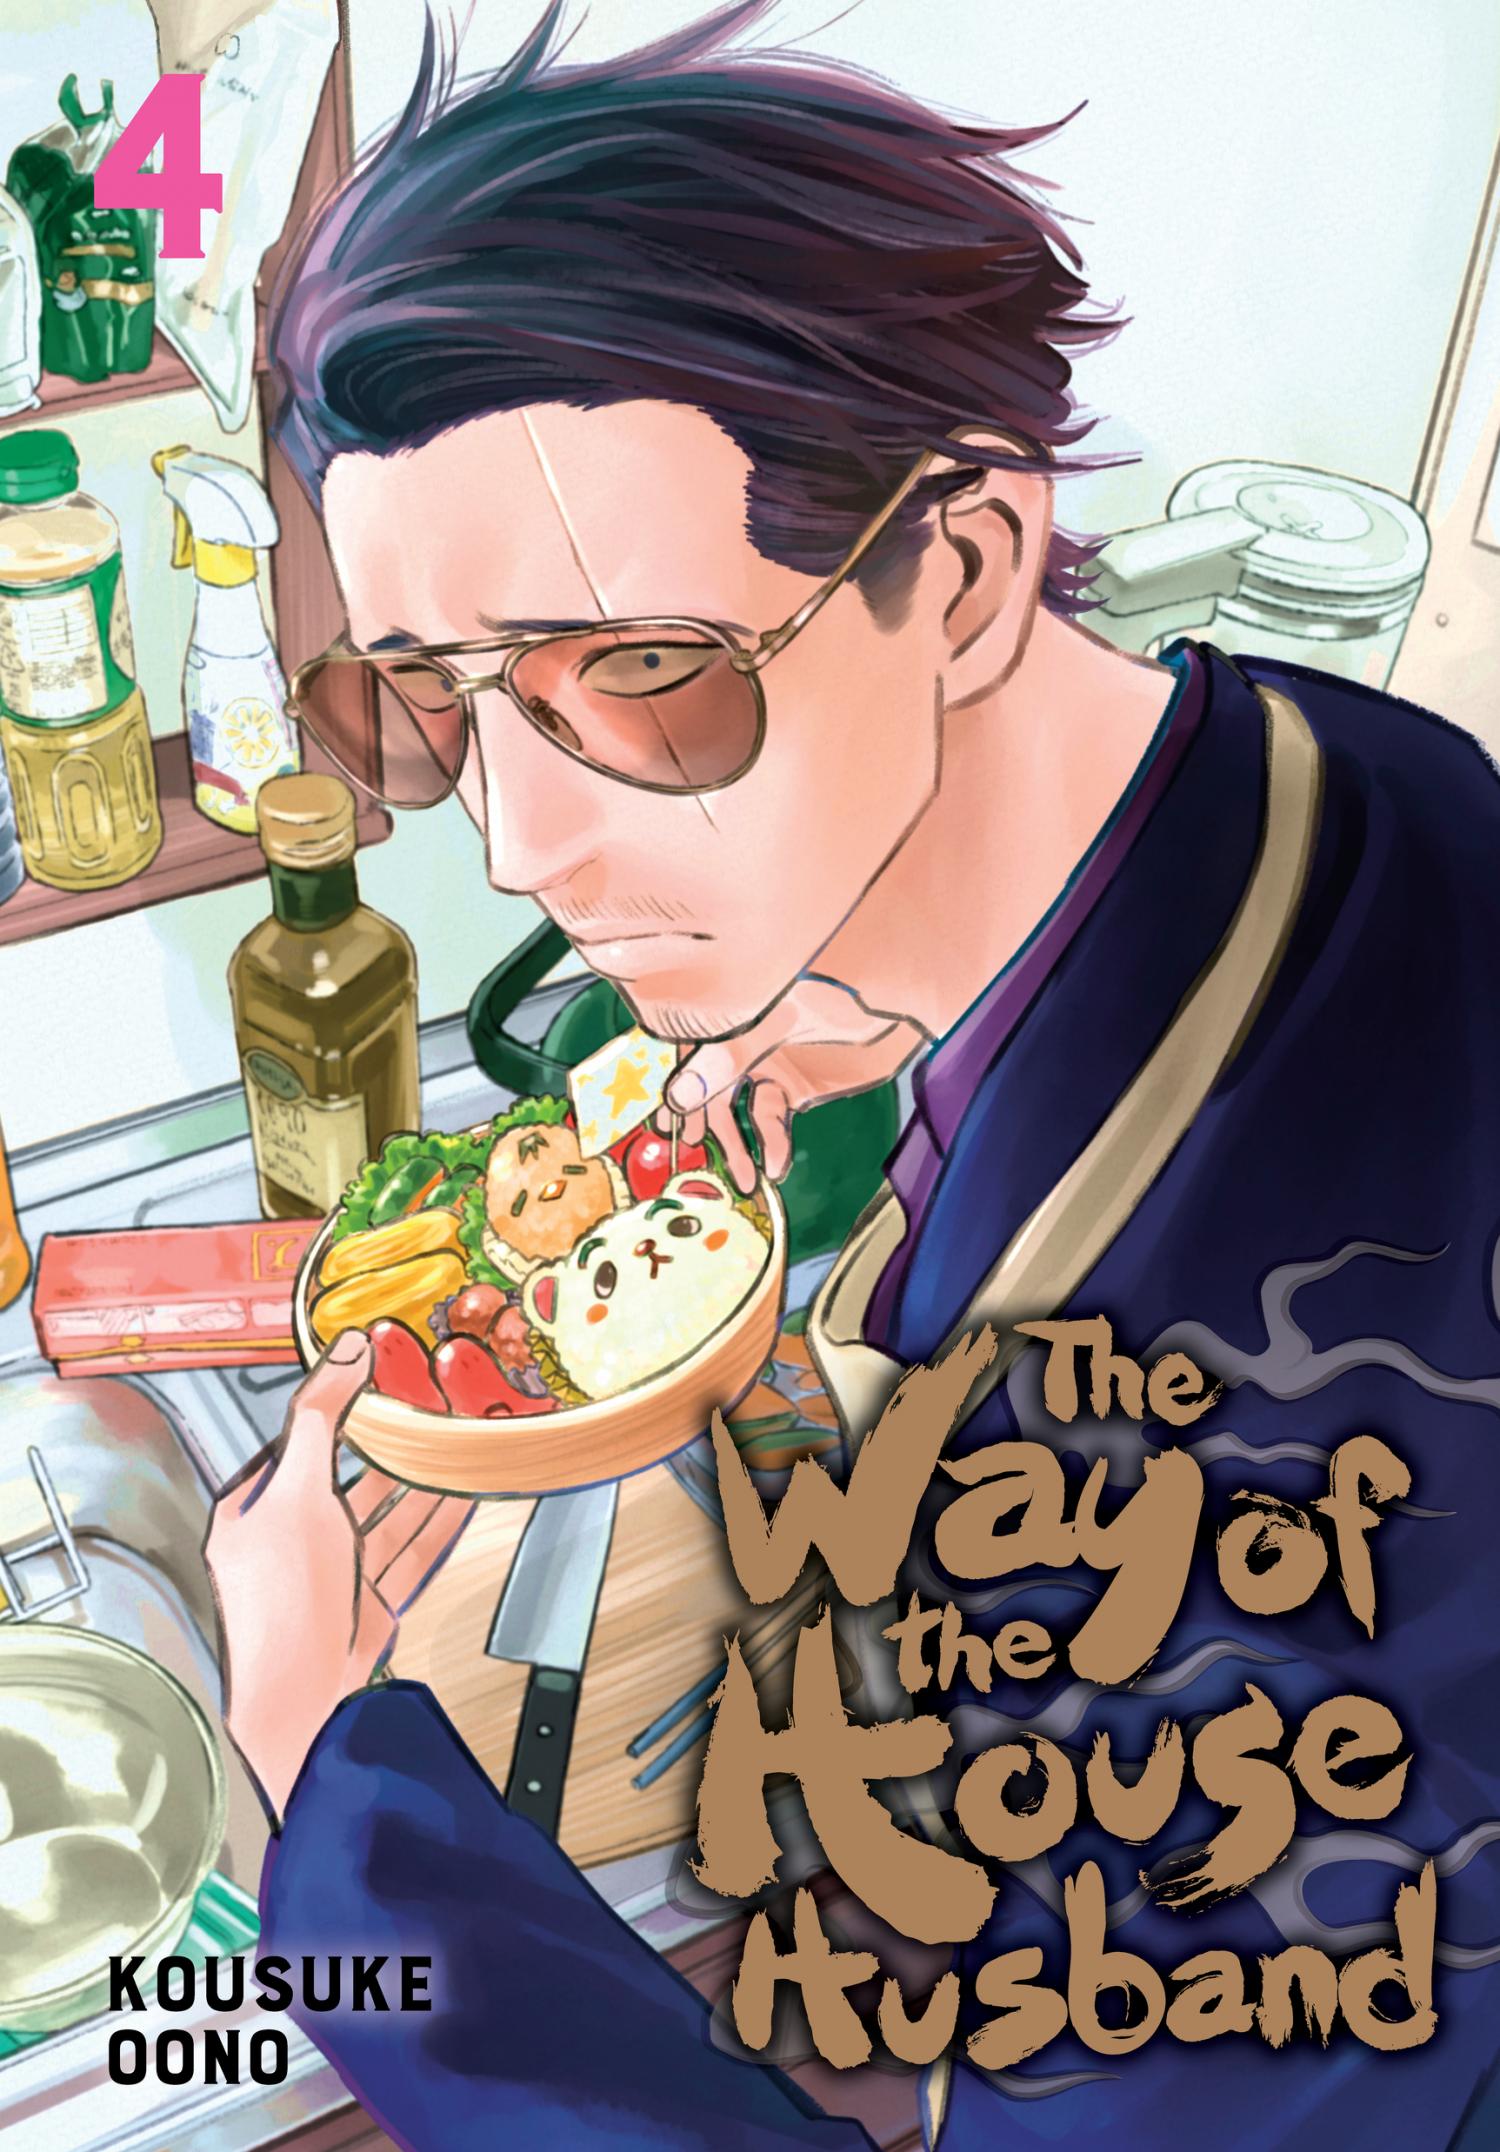 Gokushufudou: The Way Of The House Husband Chapter 28-36 - Picture 2